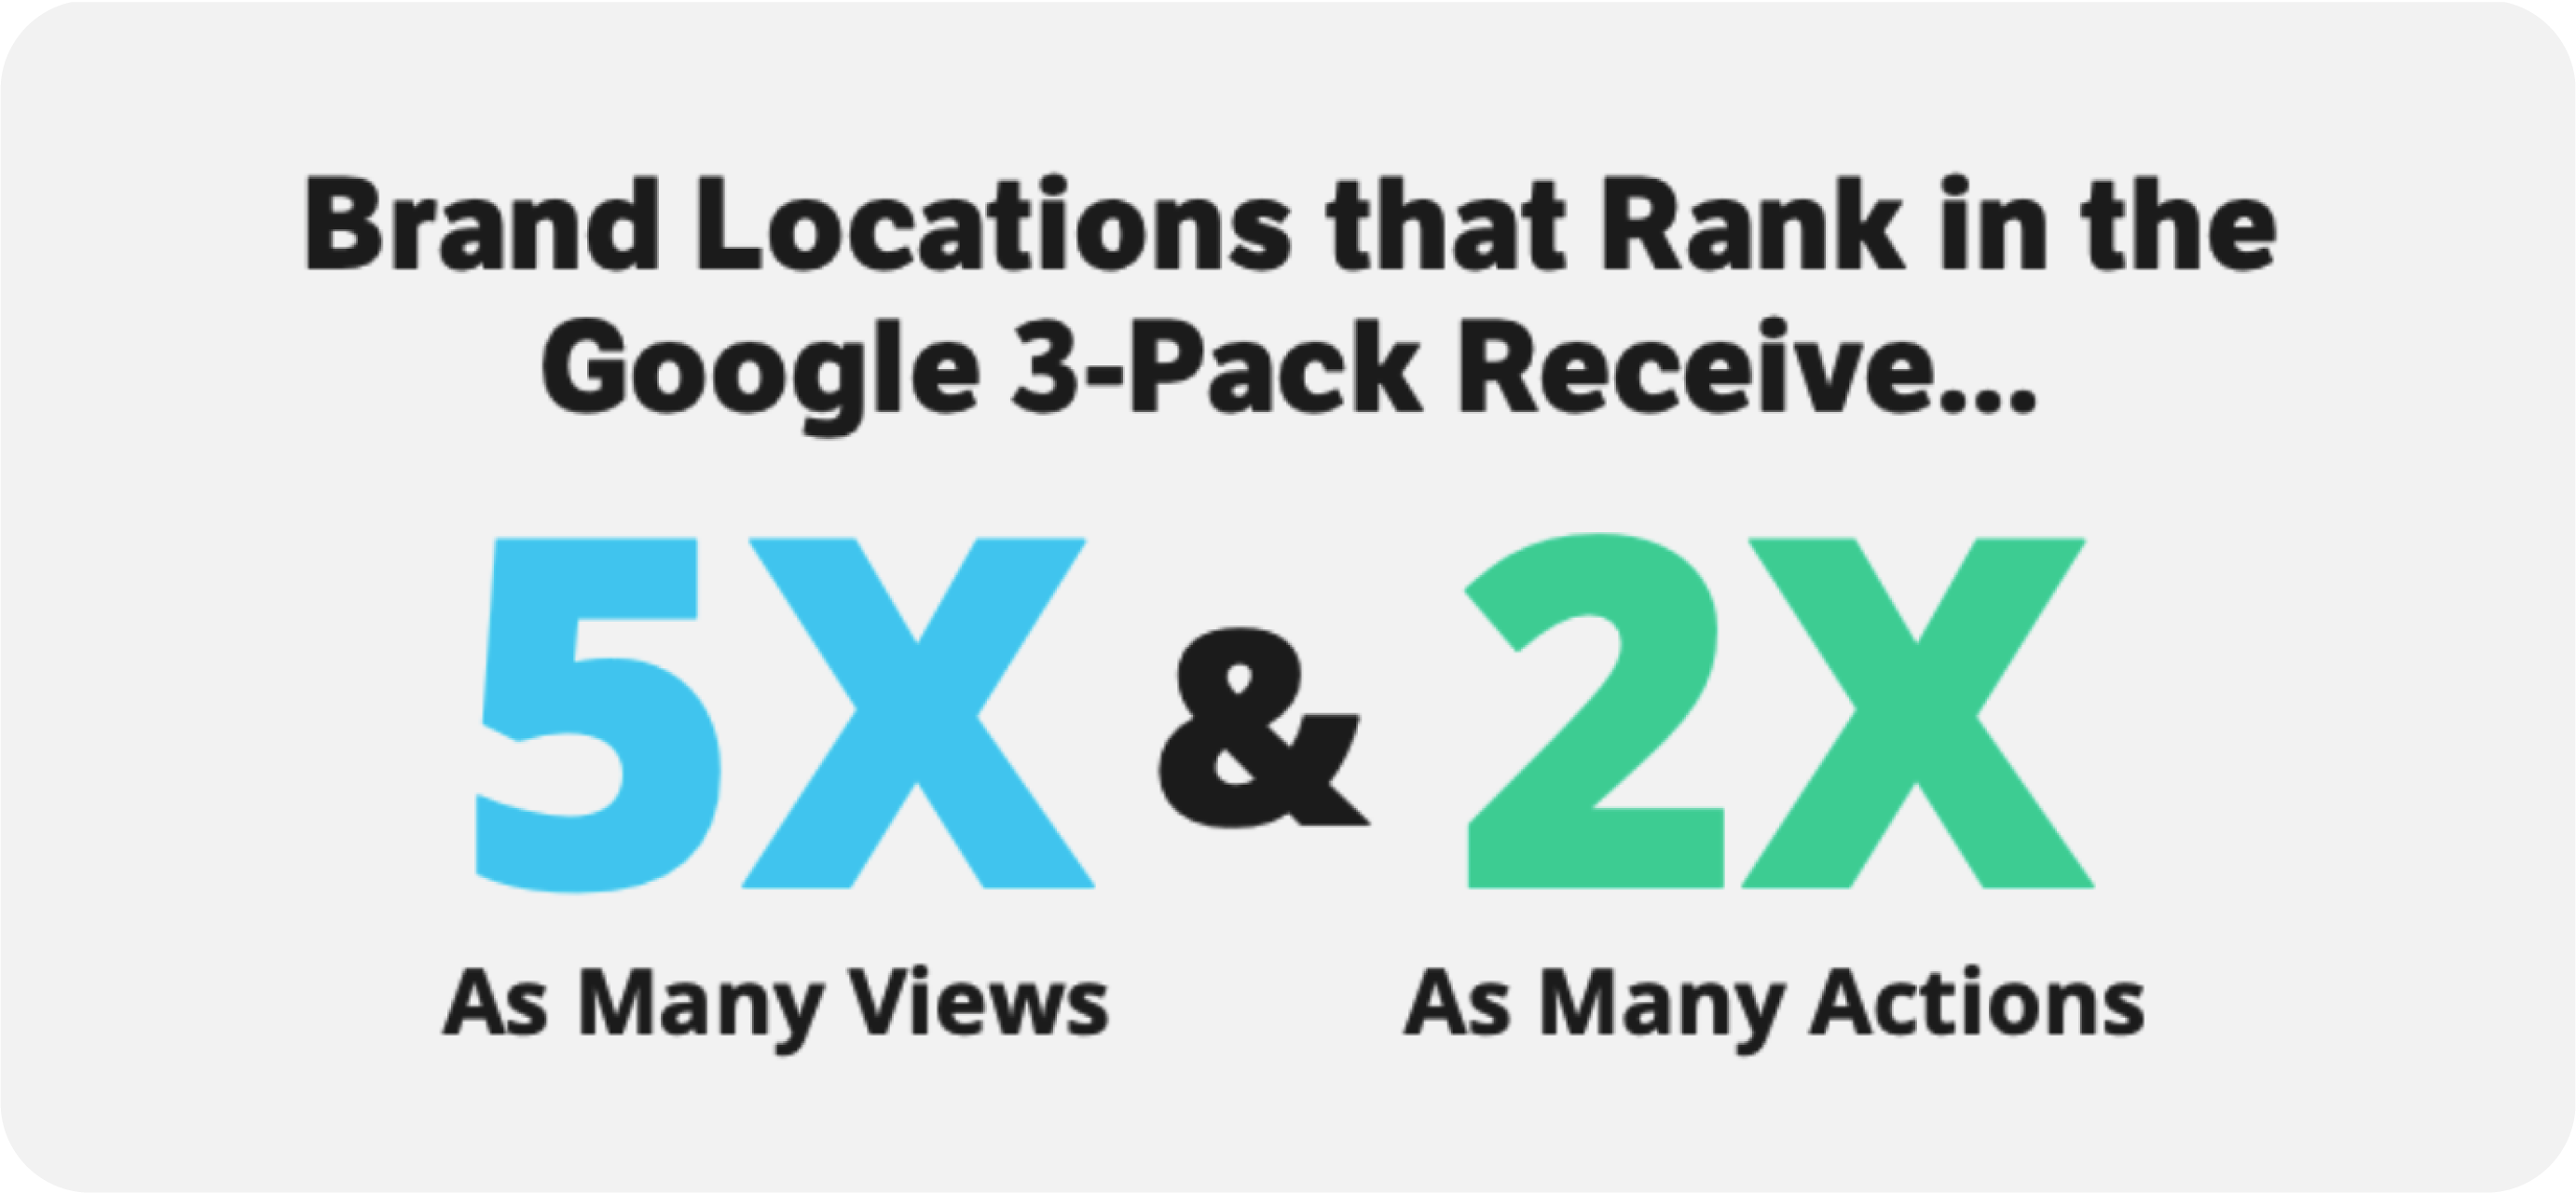 Google 3-Pack views and actions statistics